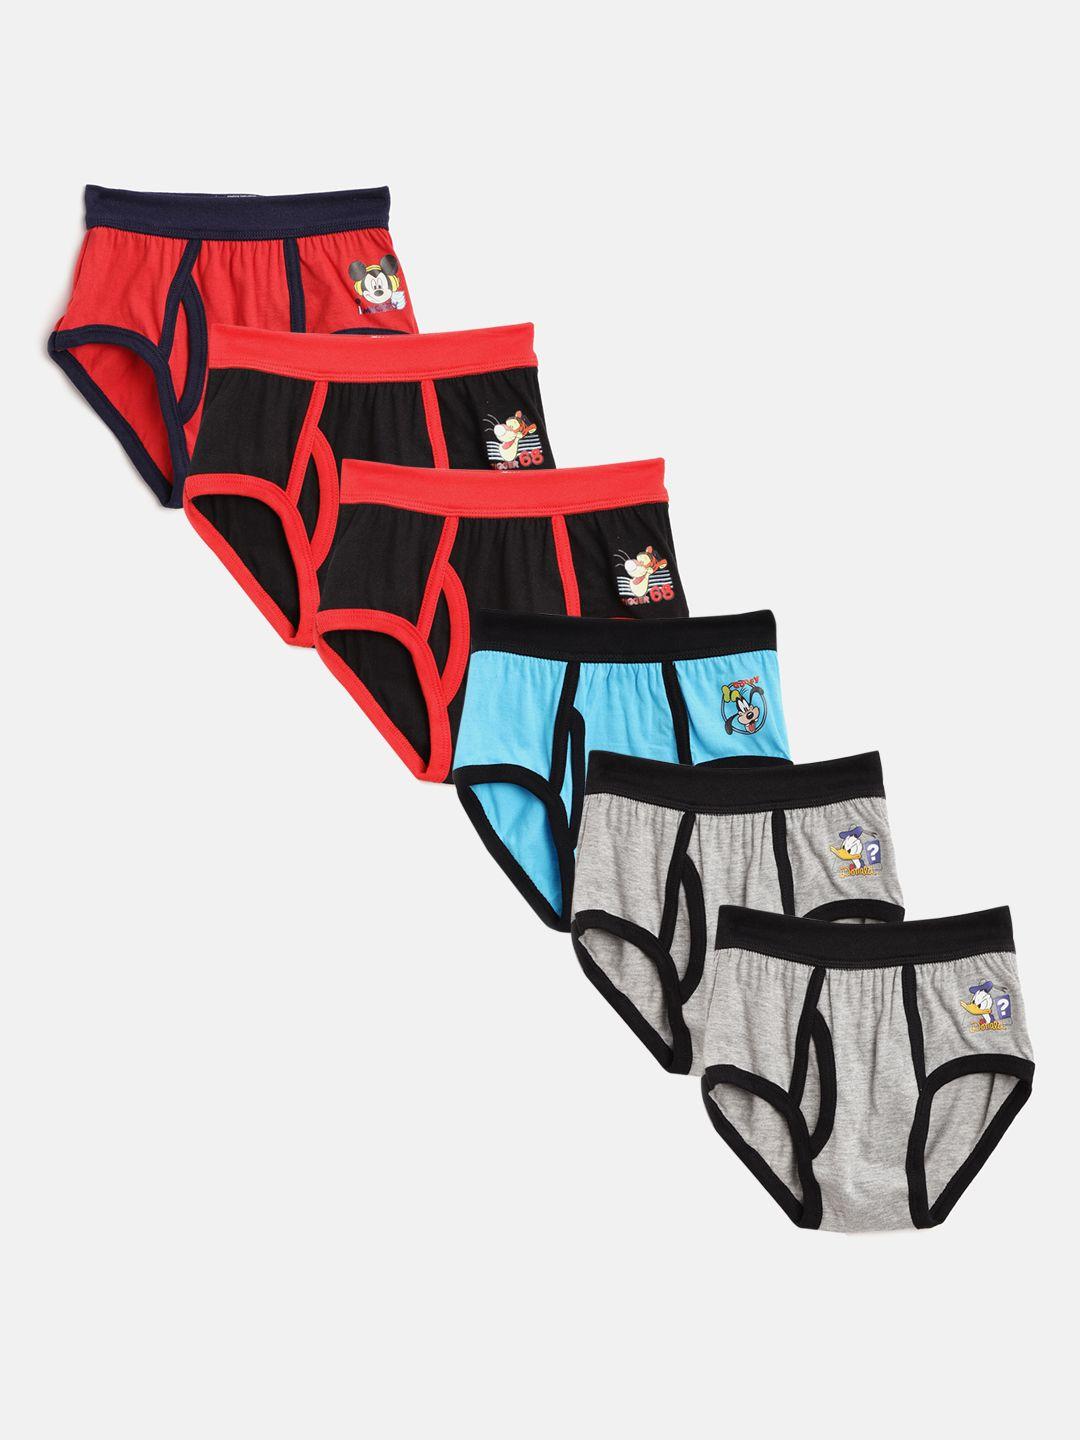 Bodycare Kids Boys Pack of 6 Assorted Briefs 307ABCDAB-65